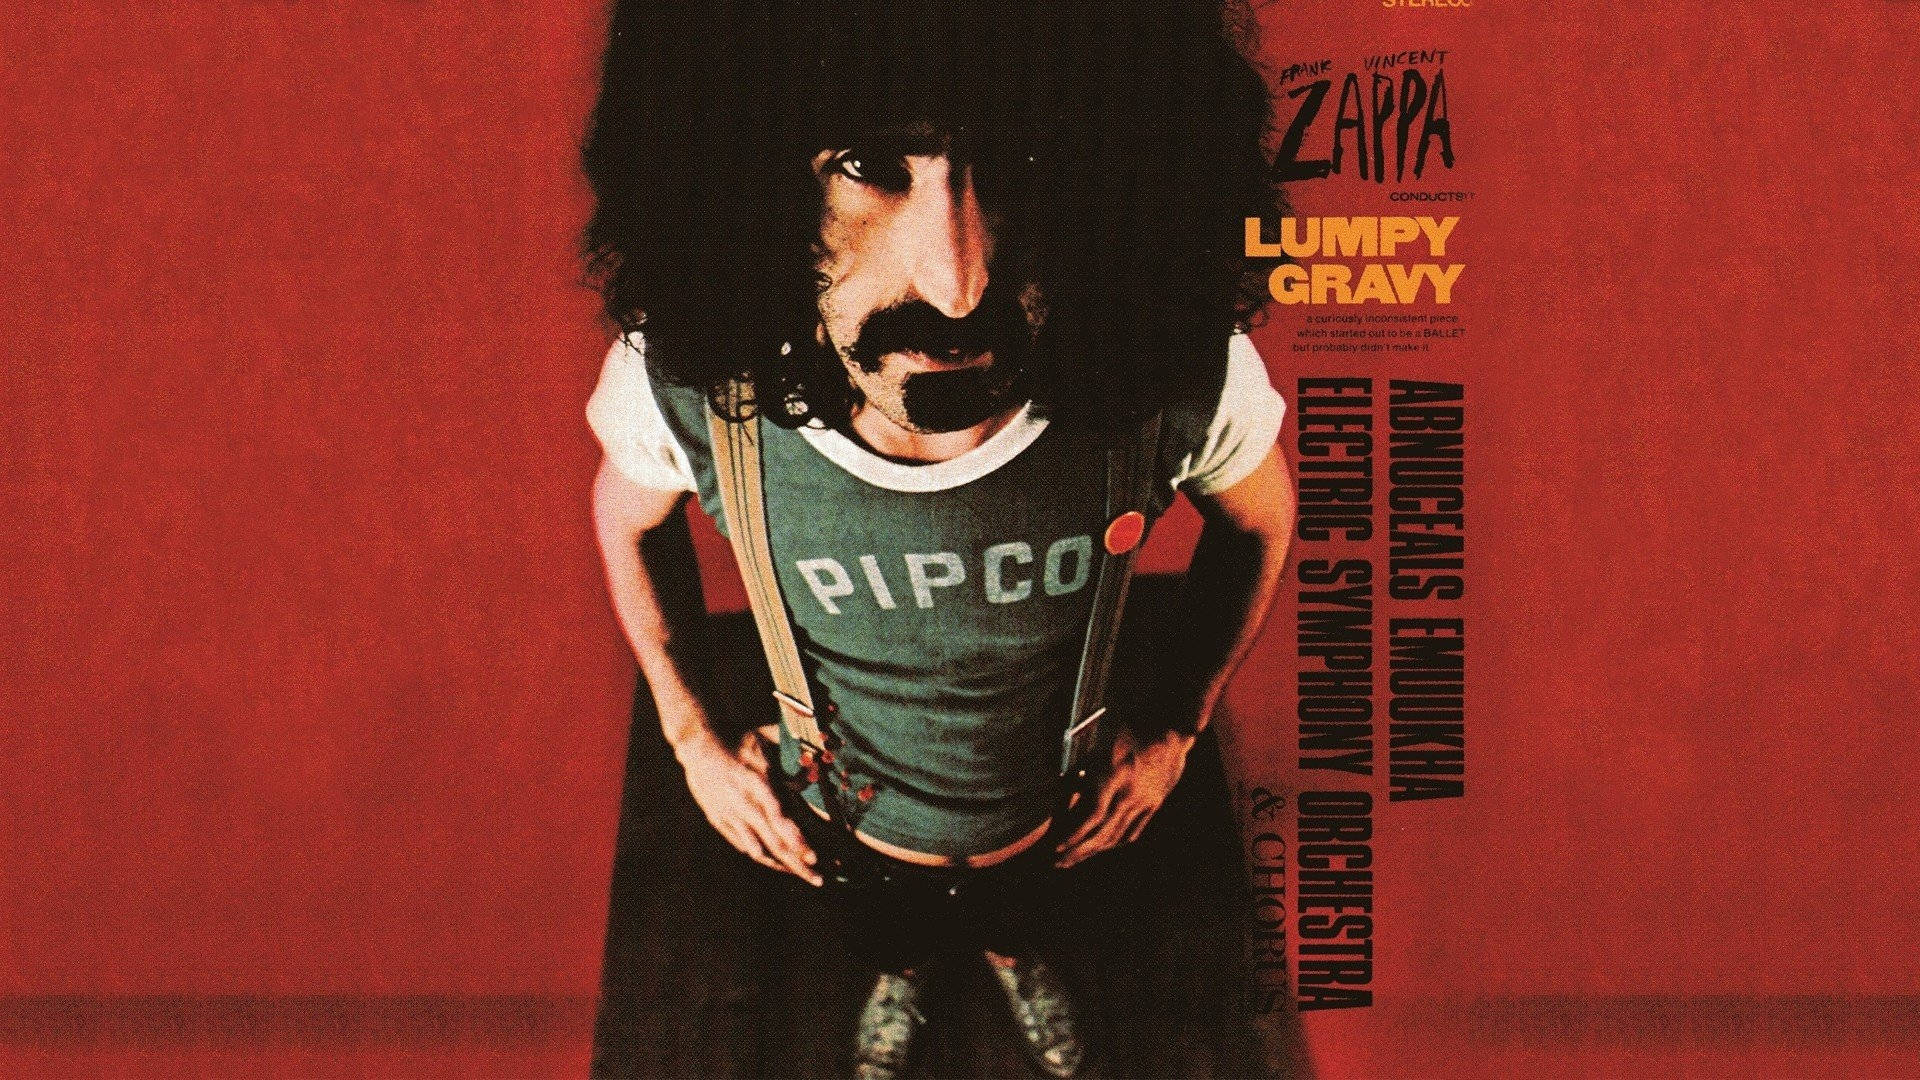 Frankzappa Lumpy Gravy - Frank Zappa Lumpy Gravy (in Portuguese, Without Any Additional Context, This Would Simply Be The Same Phrase Written Using The Portuguese Alphabet, As It Is A Proper Noun And Doesn't Change When Translated Into Other Languages) Papel de Parede